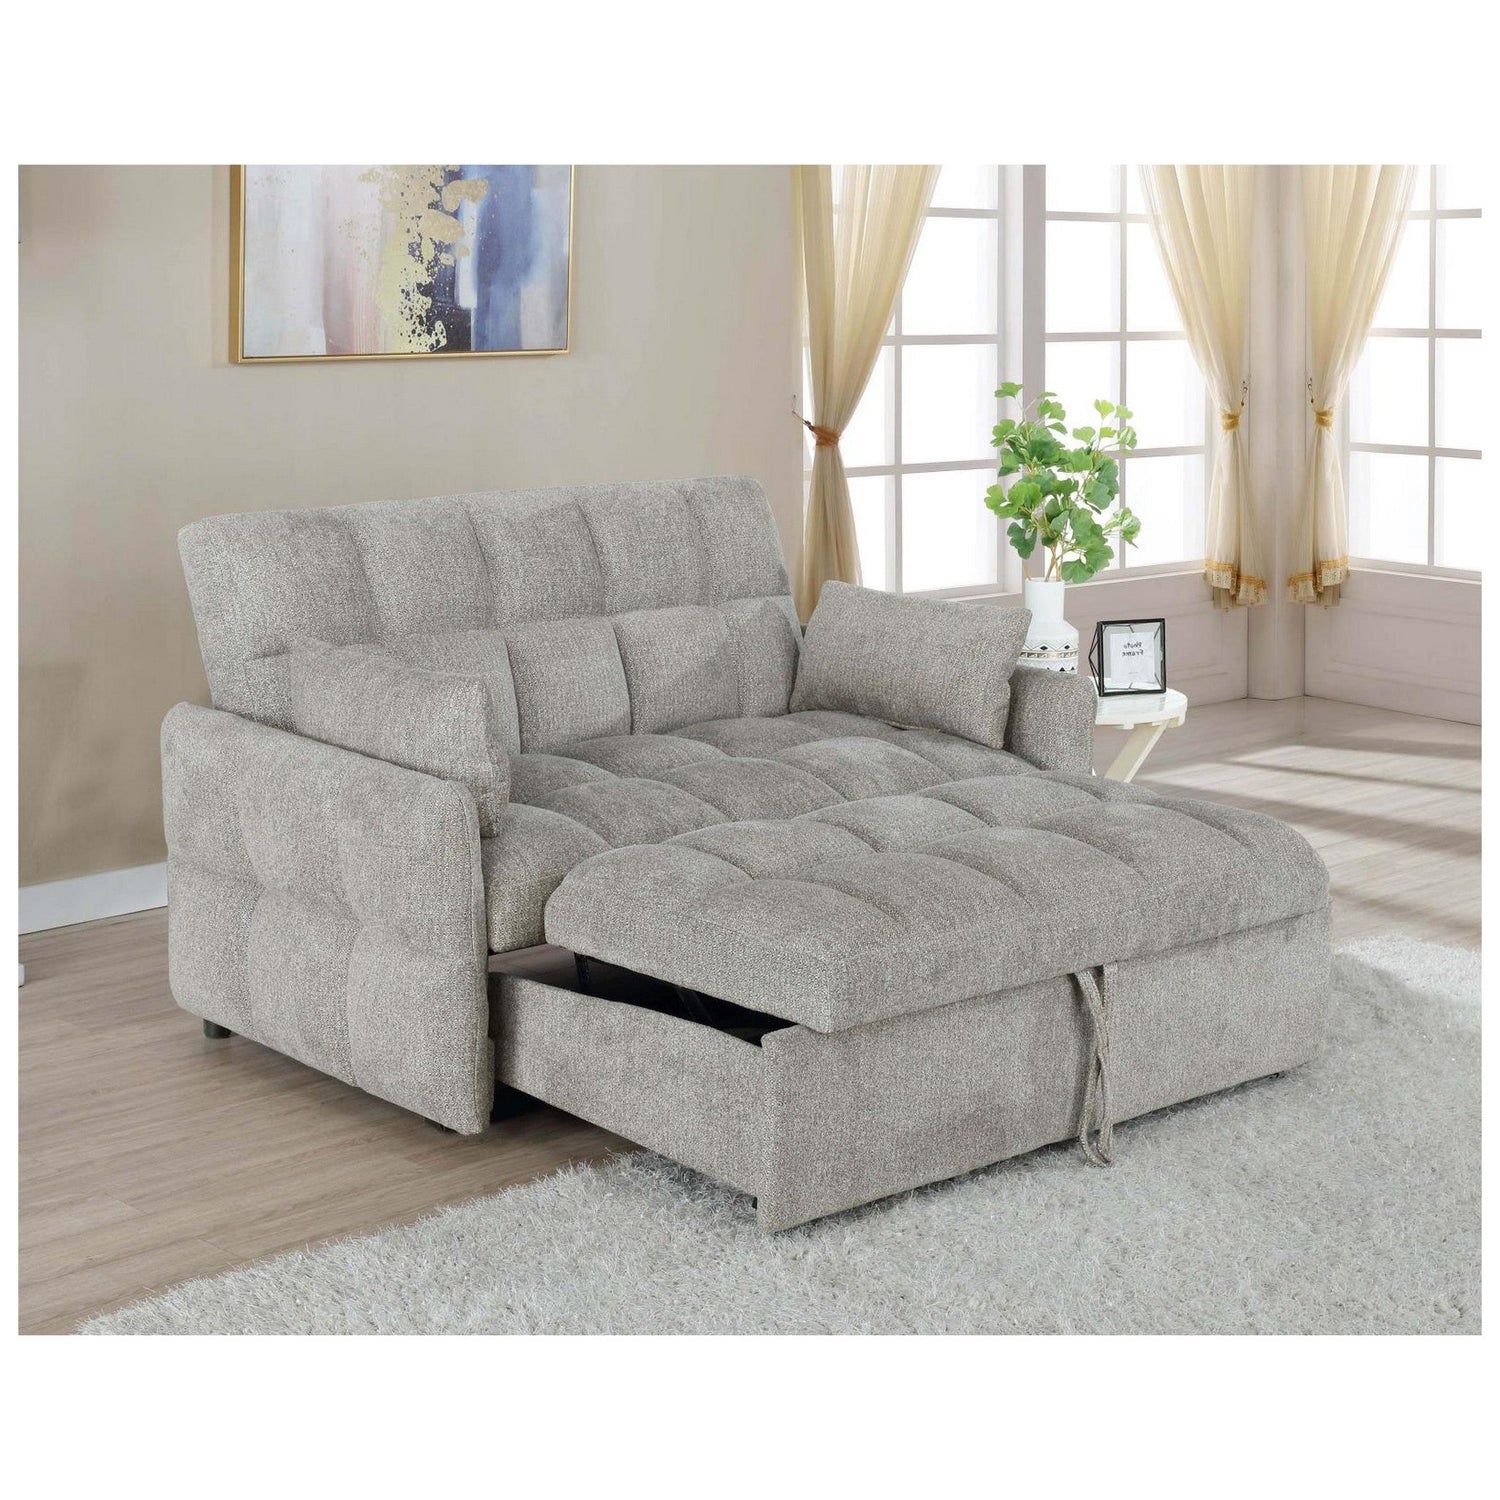 Cotswold Tufted Cushion Sleeper Sofa Bed Beige 508307